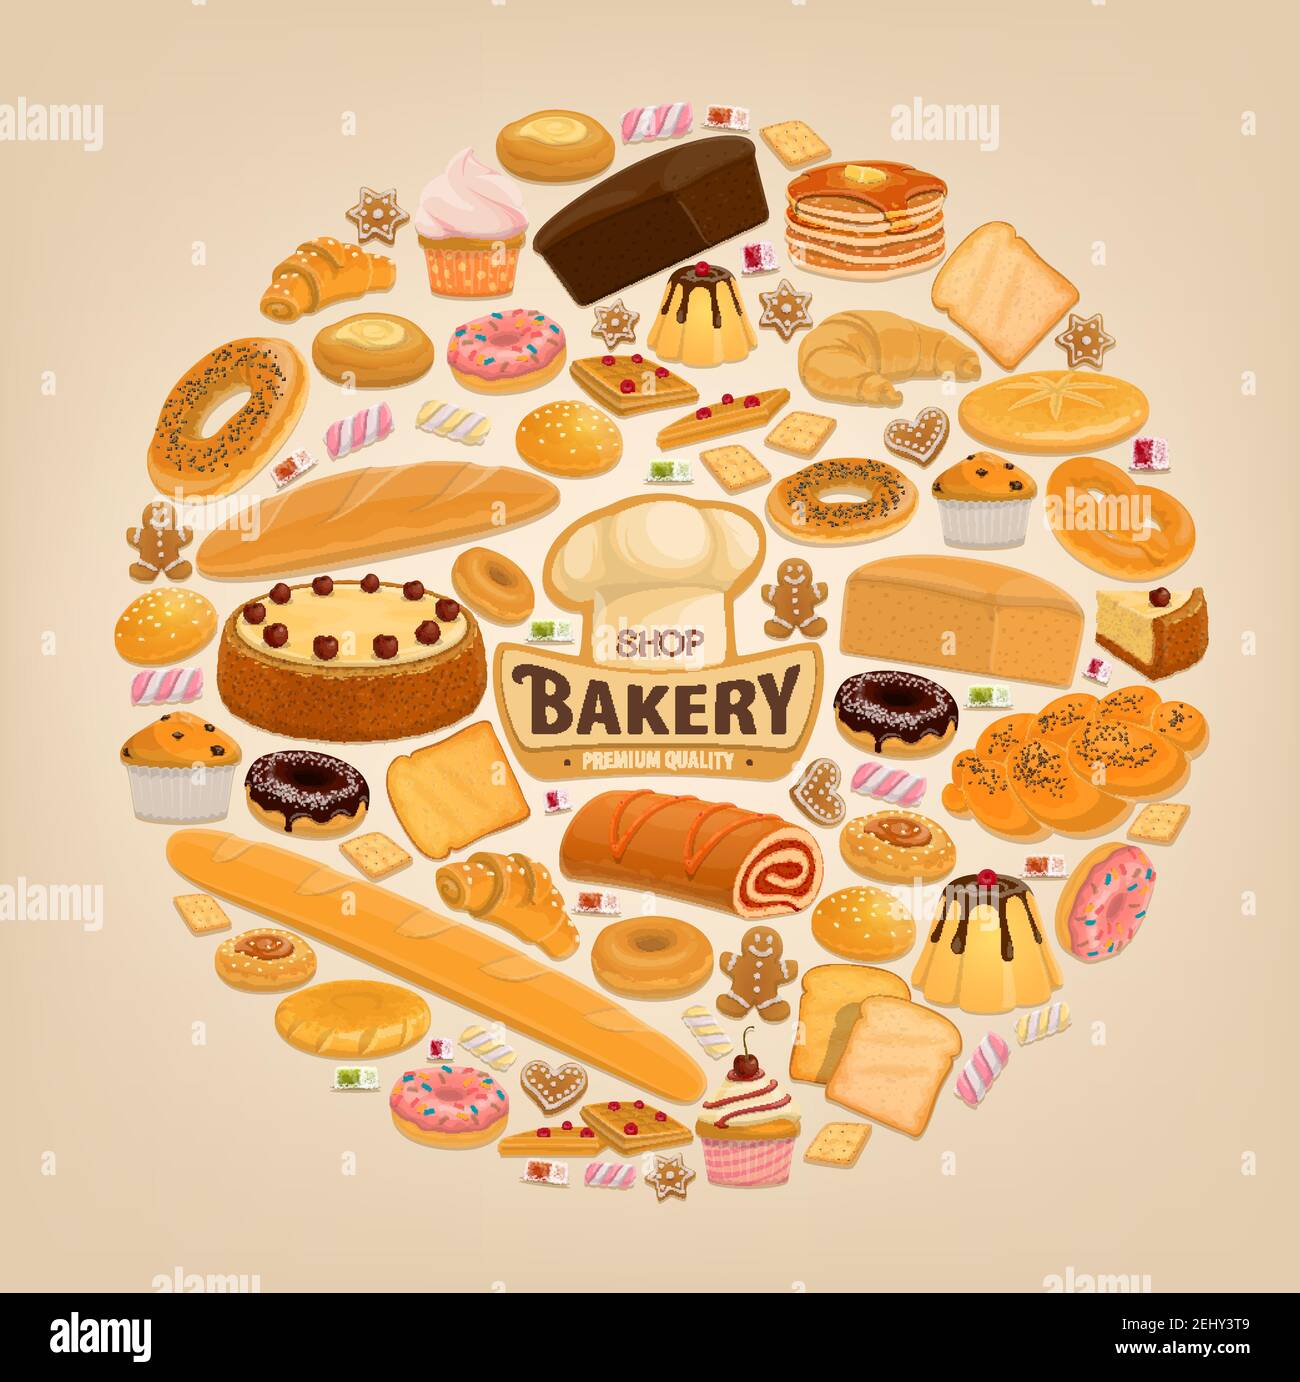 Bakery desserts, pastry and bread. Vector bakery shop sweet donut, chocolate pie or tiramisu torte and cupcake, wheat bagel or pretzel and rye bun wit Stock Vector